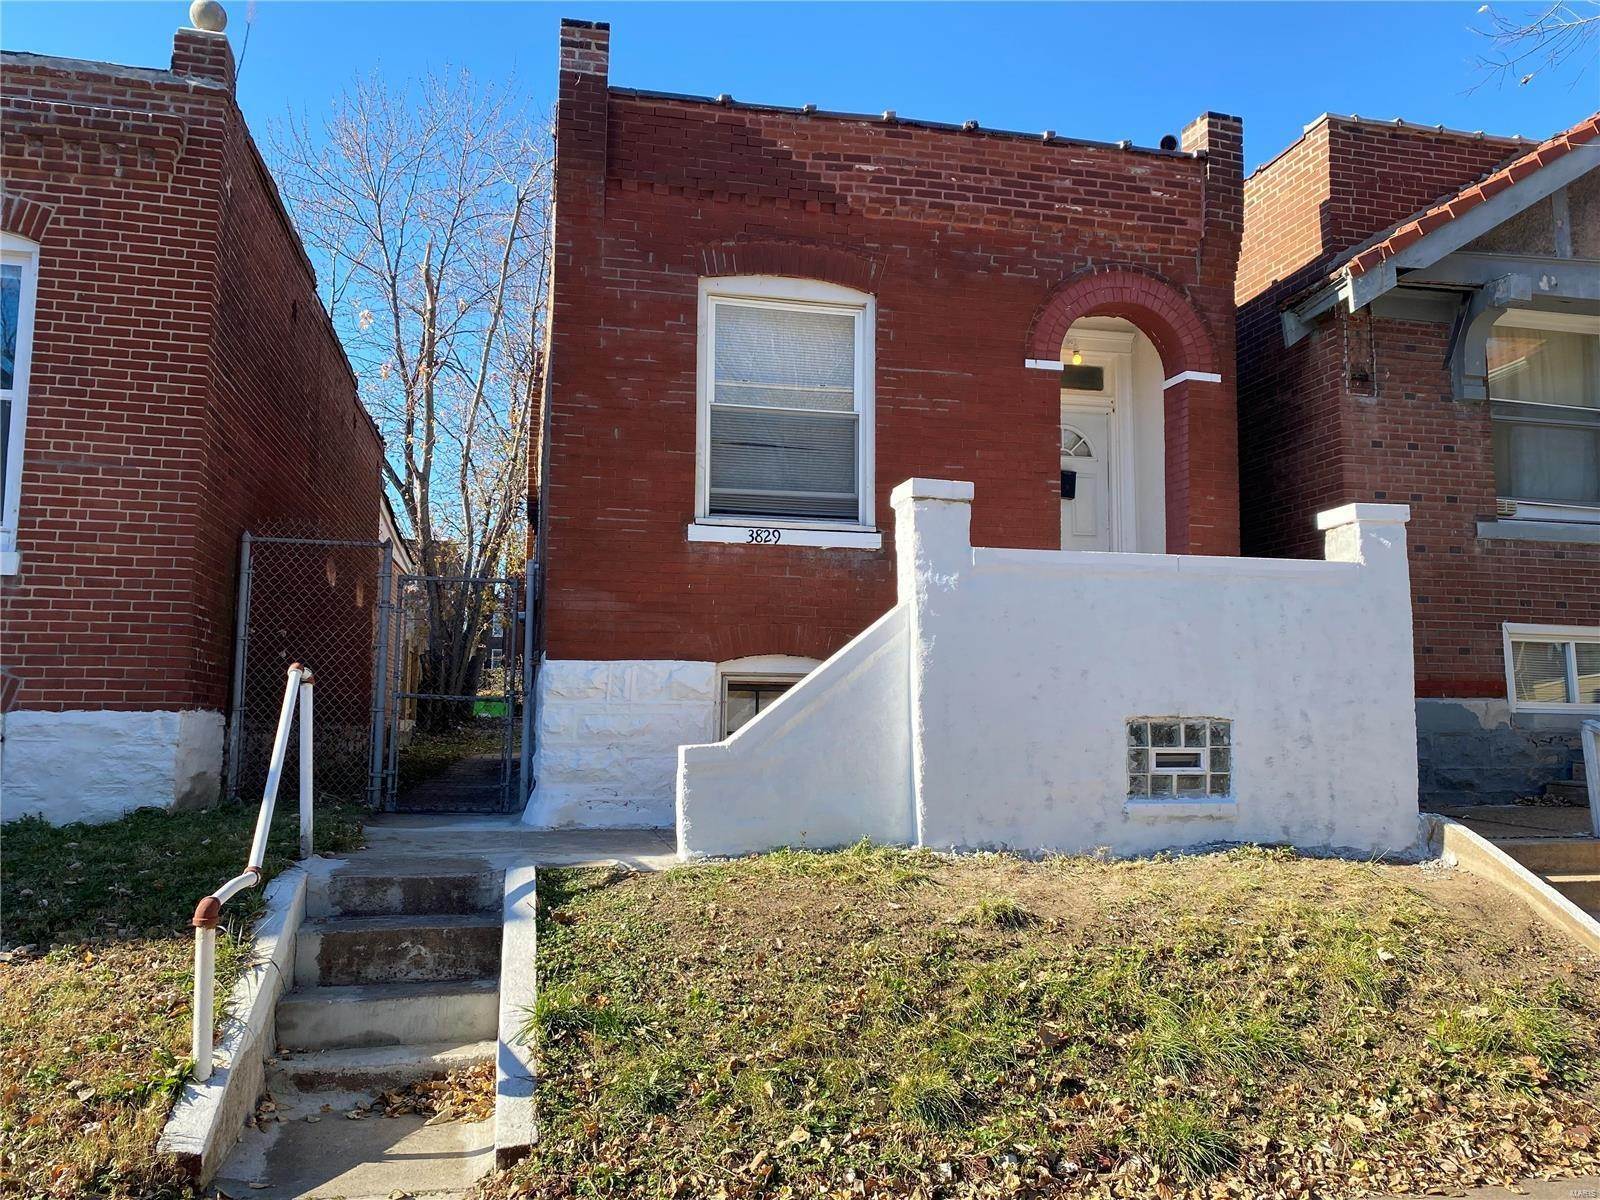 Property for Sale at 3829 Pennsylvania Avenue St. Louis, Missouri 63118 United States